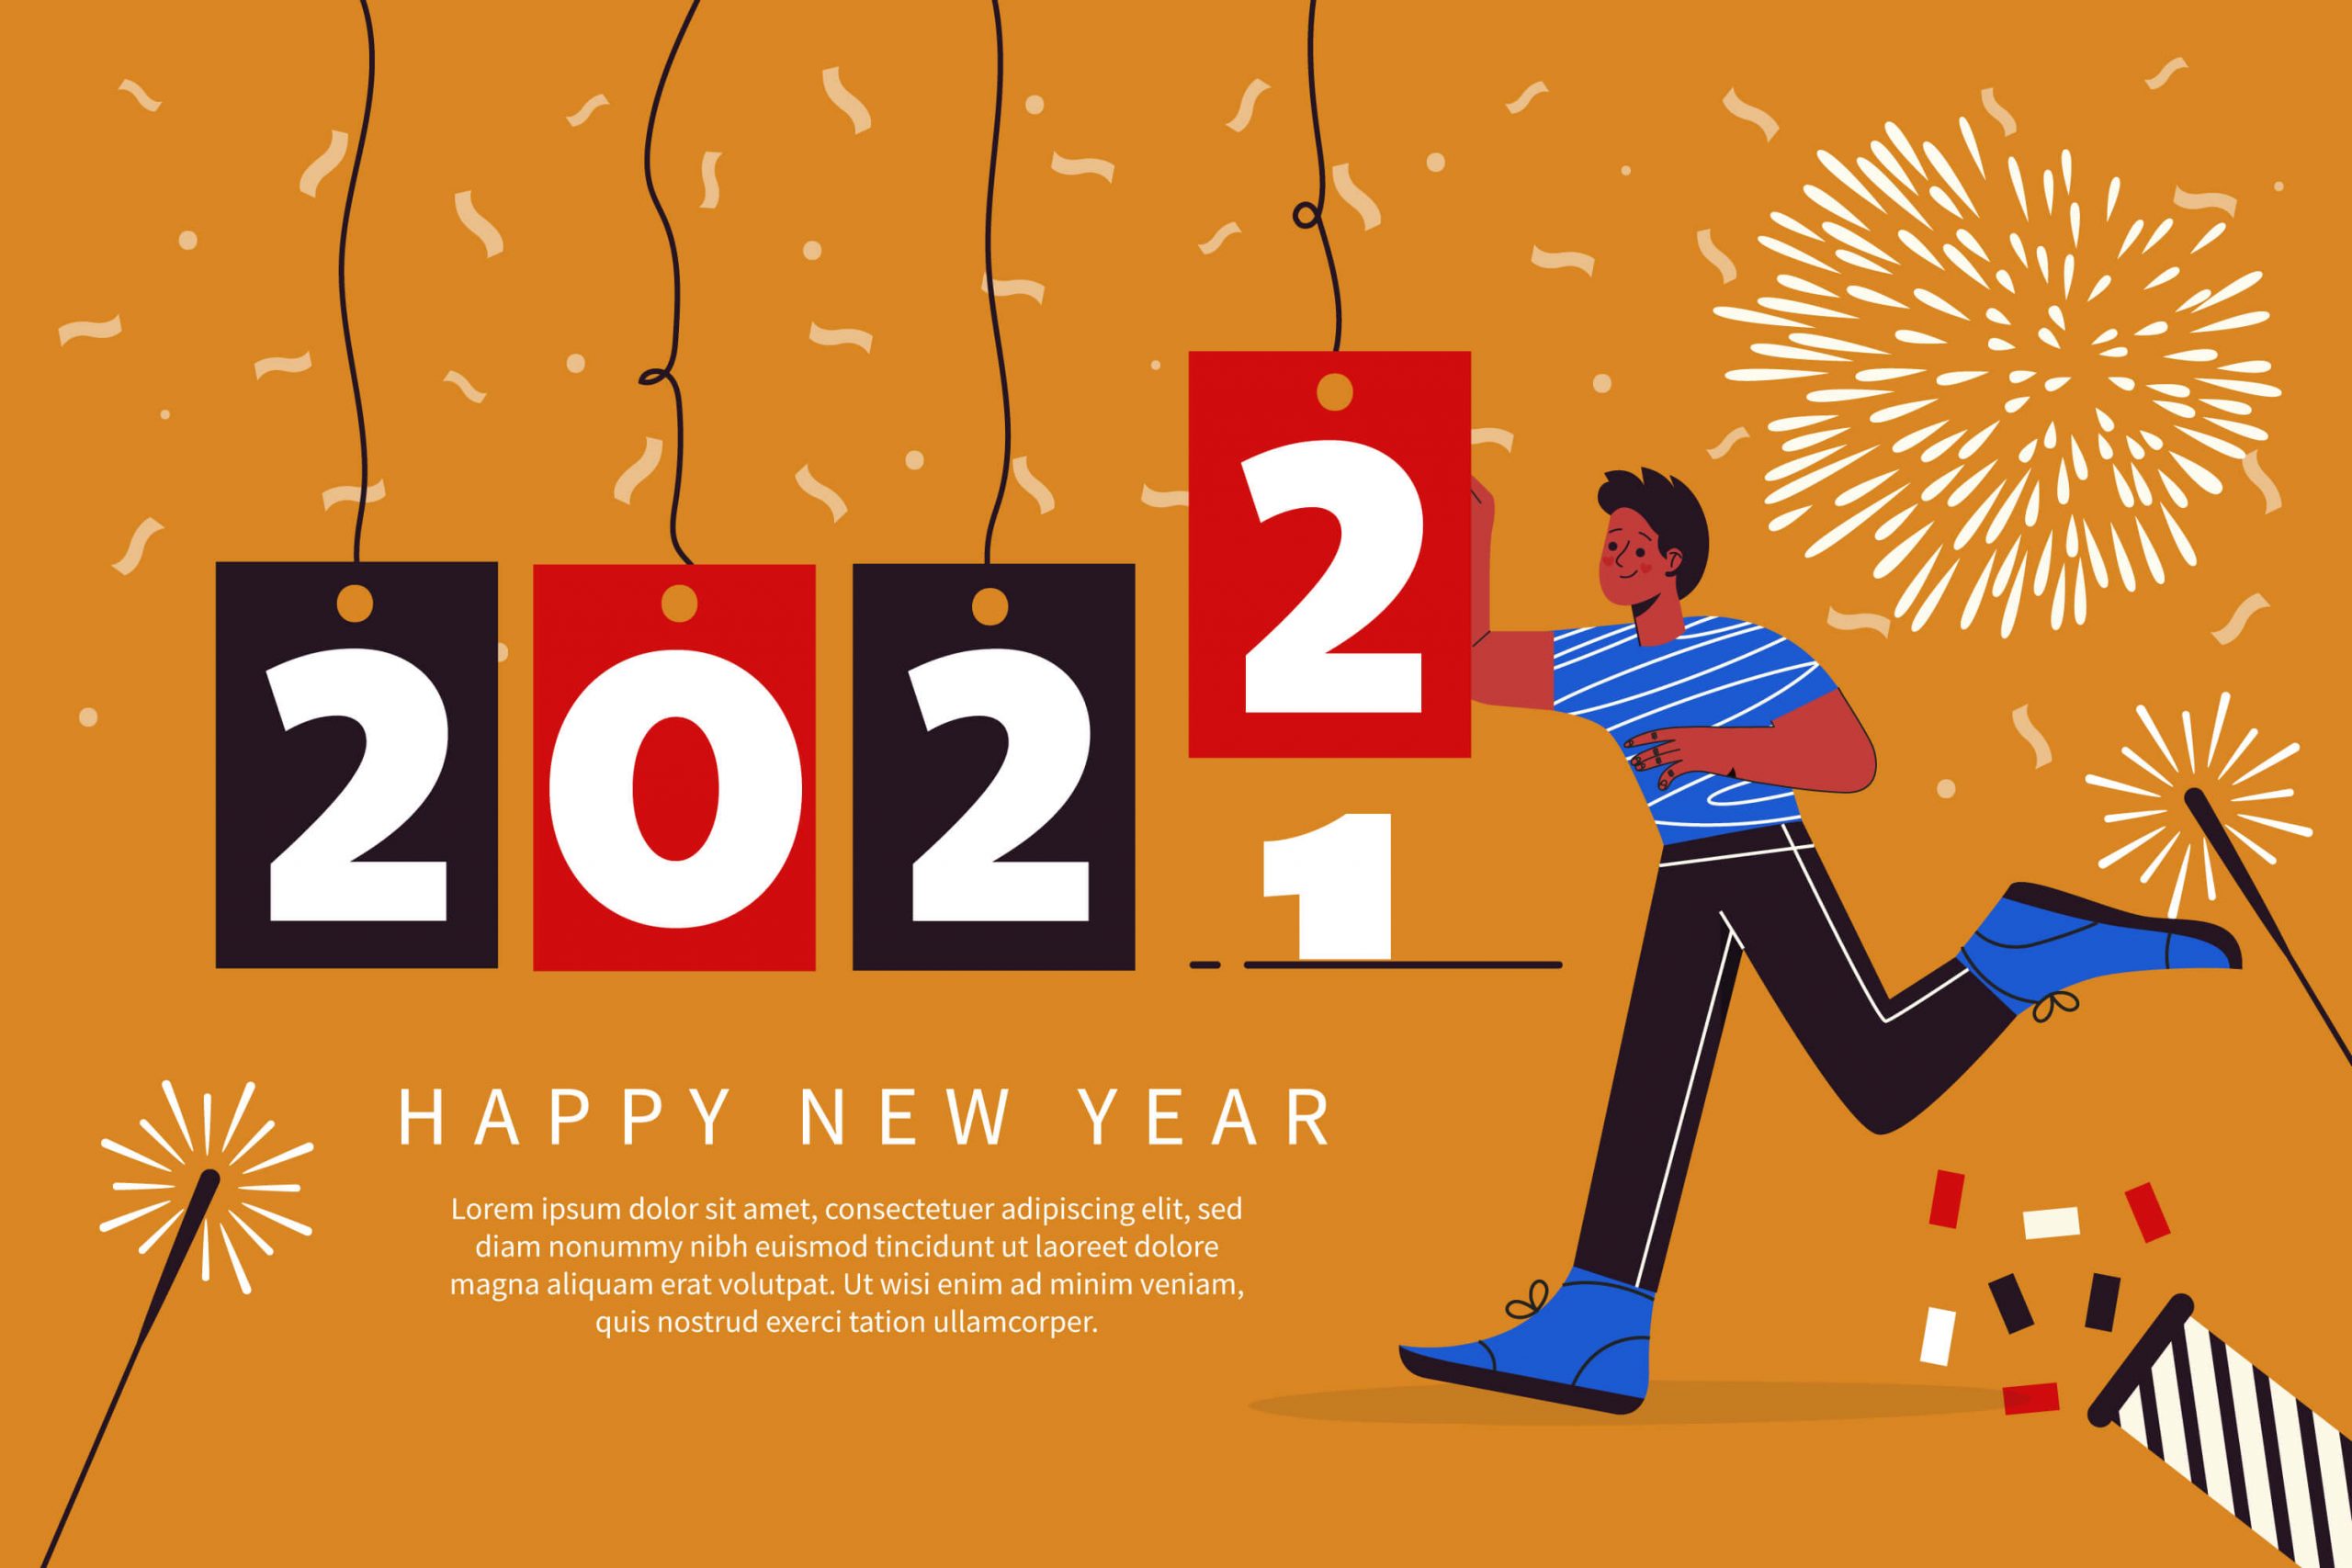 Happy New Year 2022 Pic Download